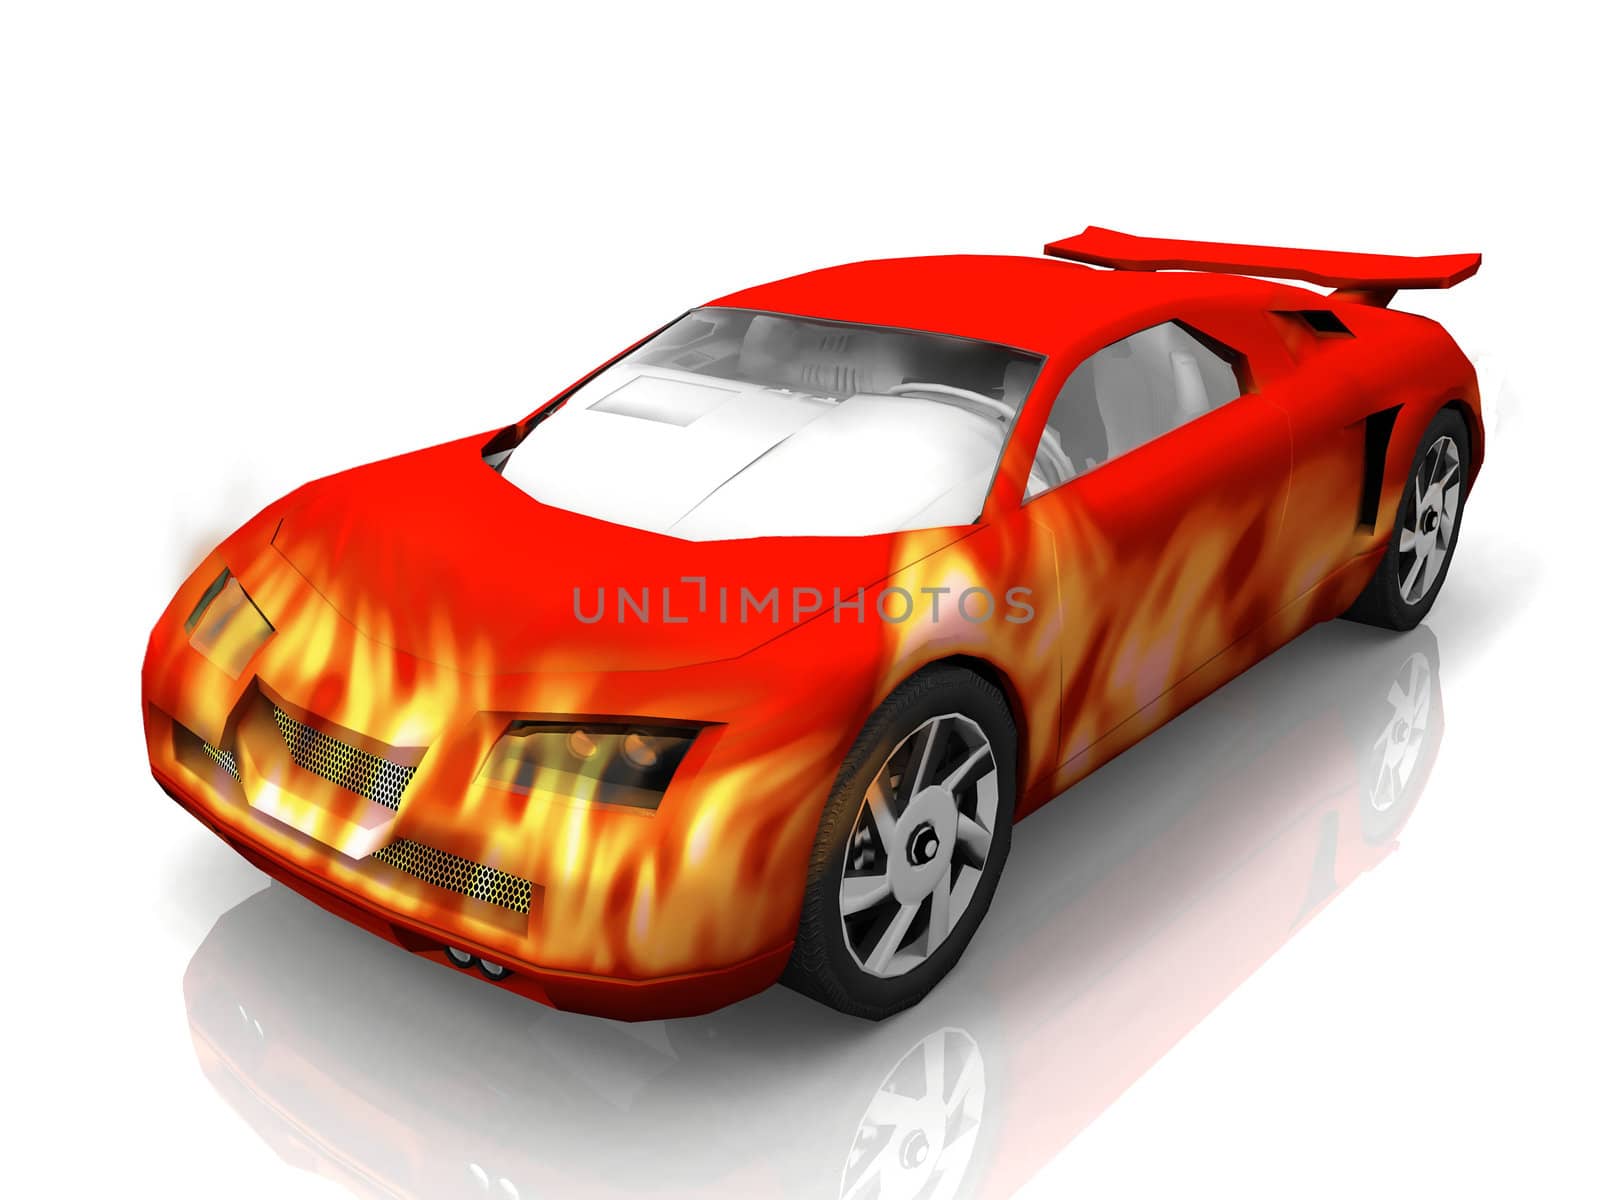 test car with red flames